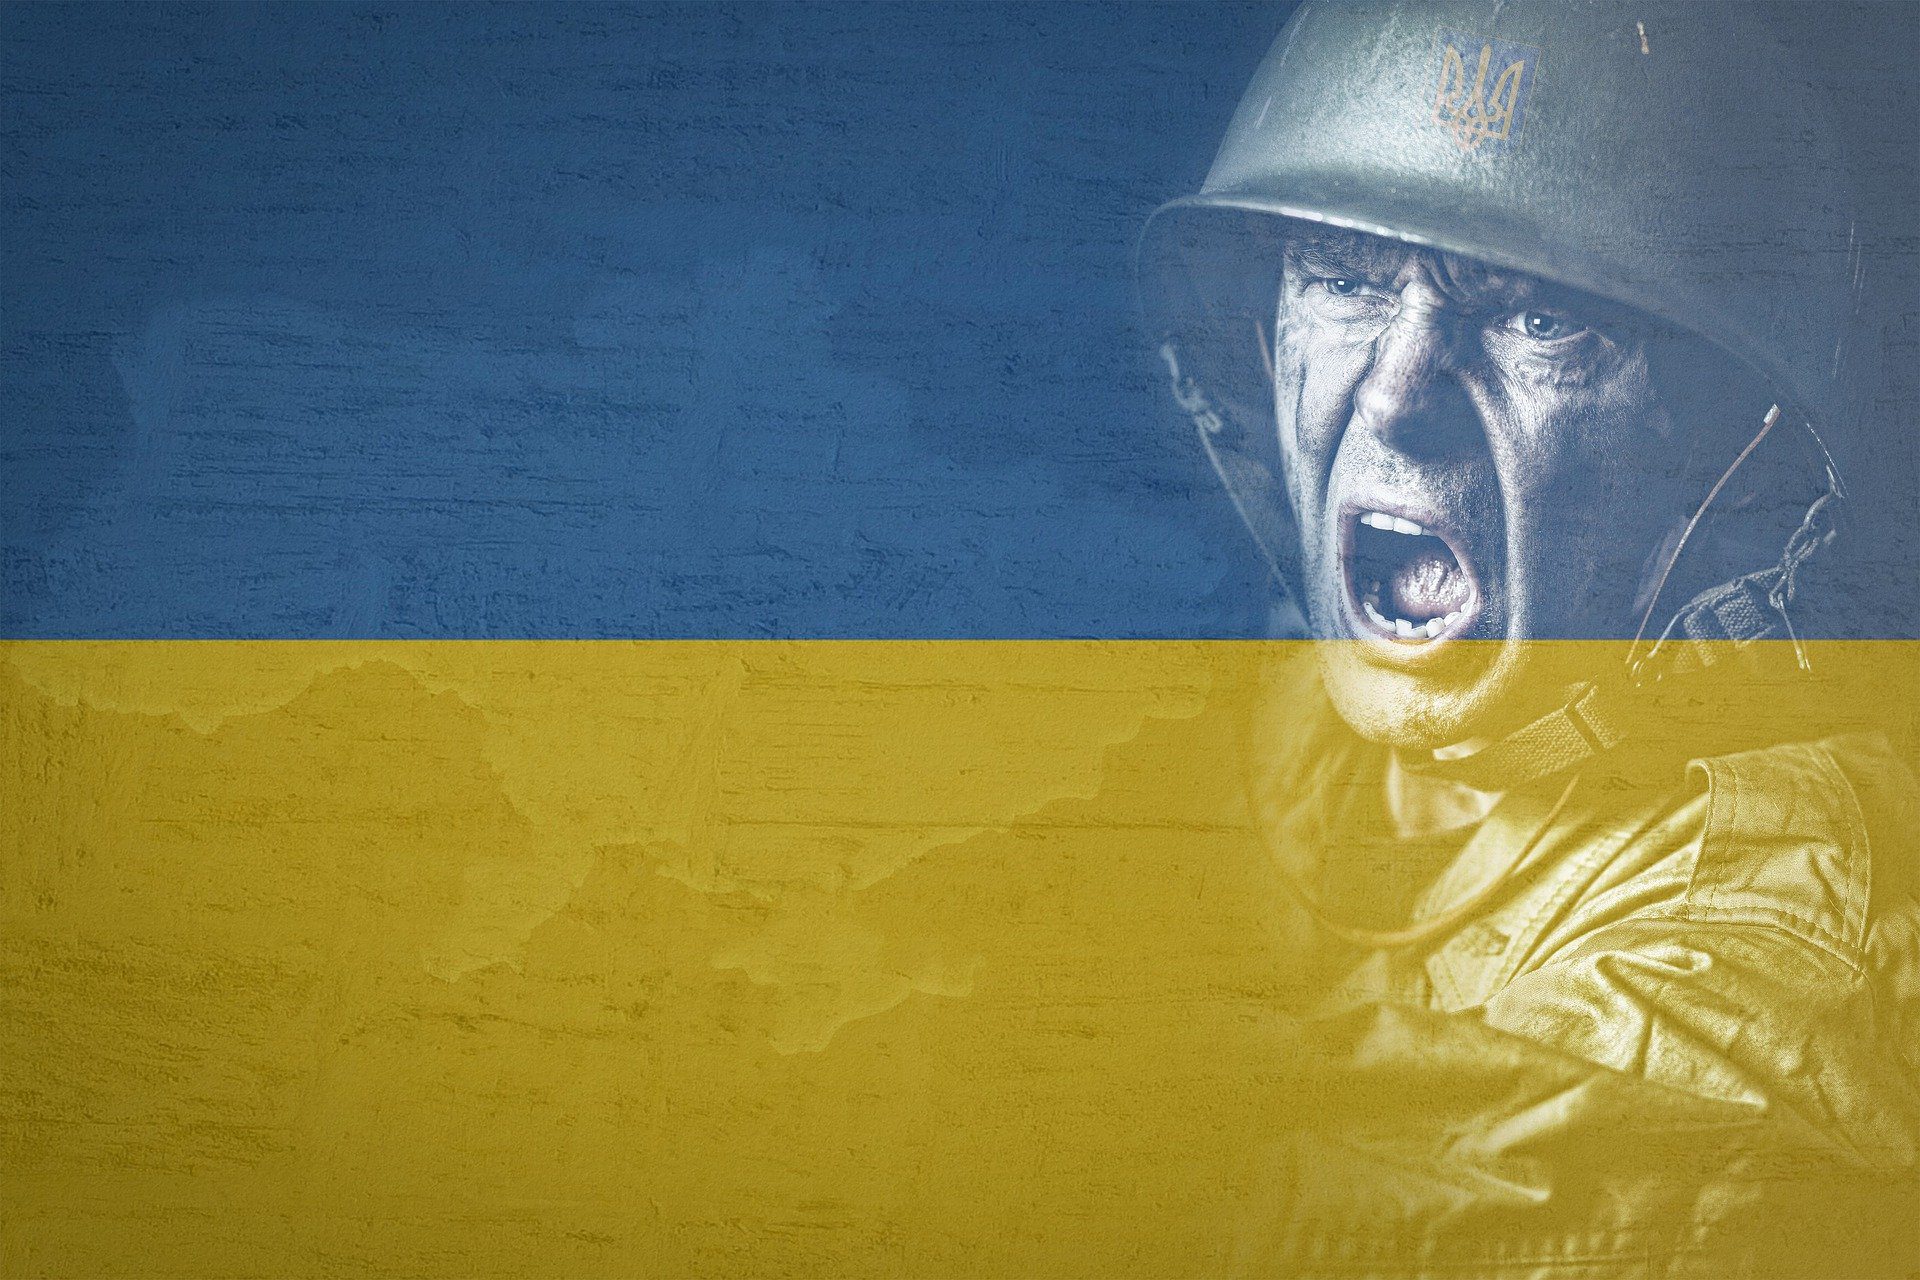 FOR THE BRAVE UKRAINE PEOPLE